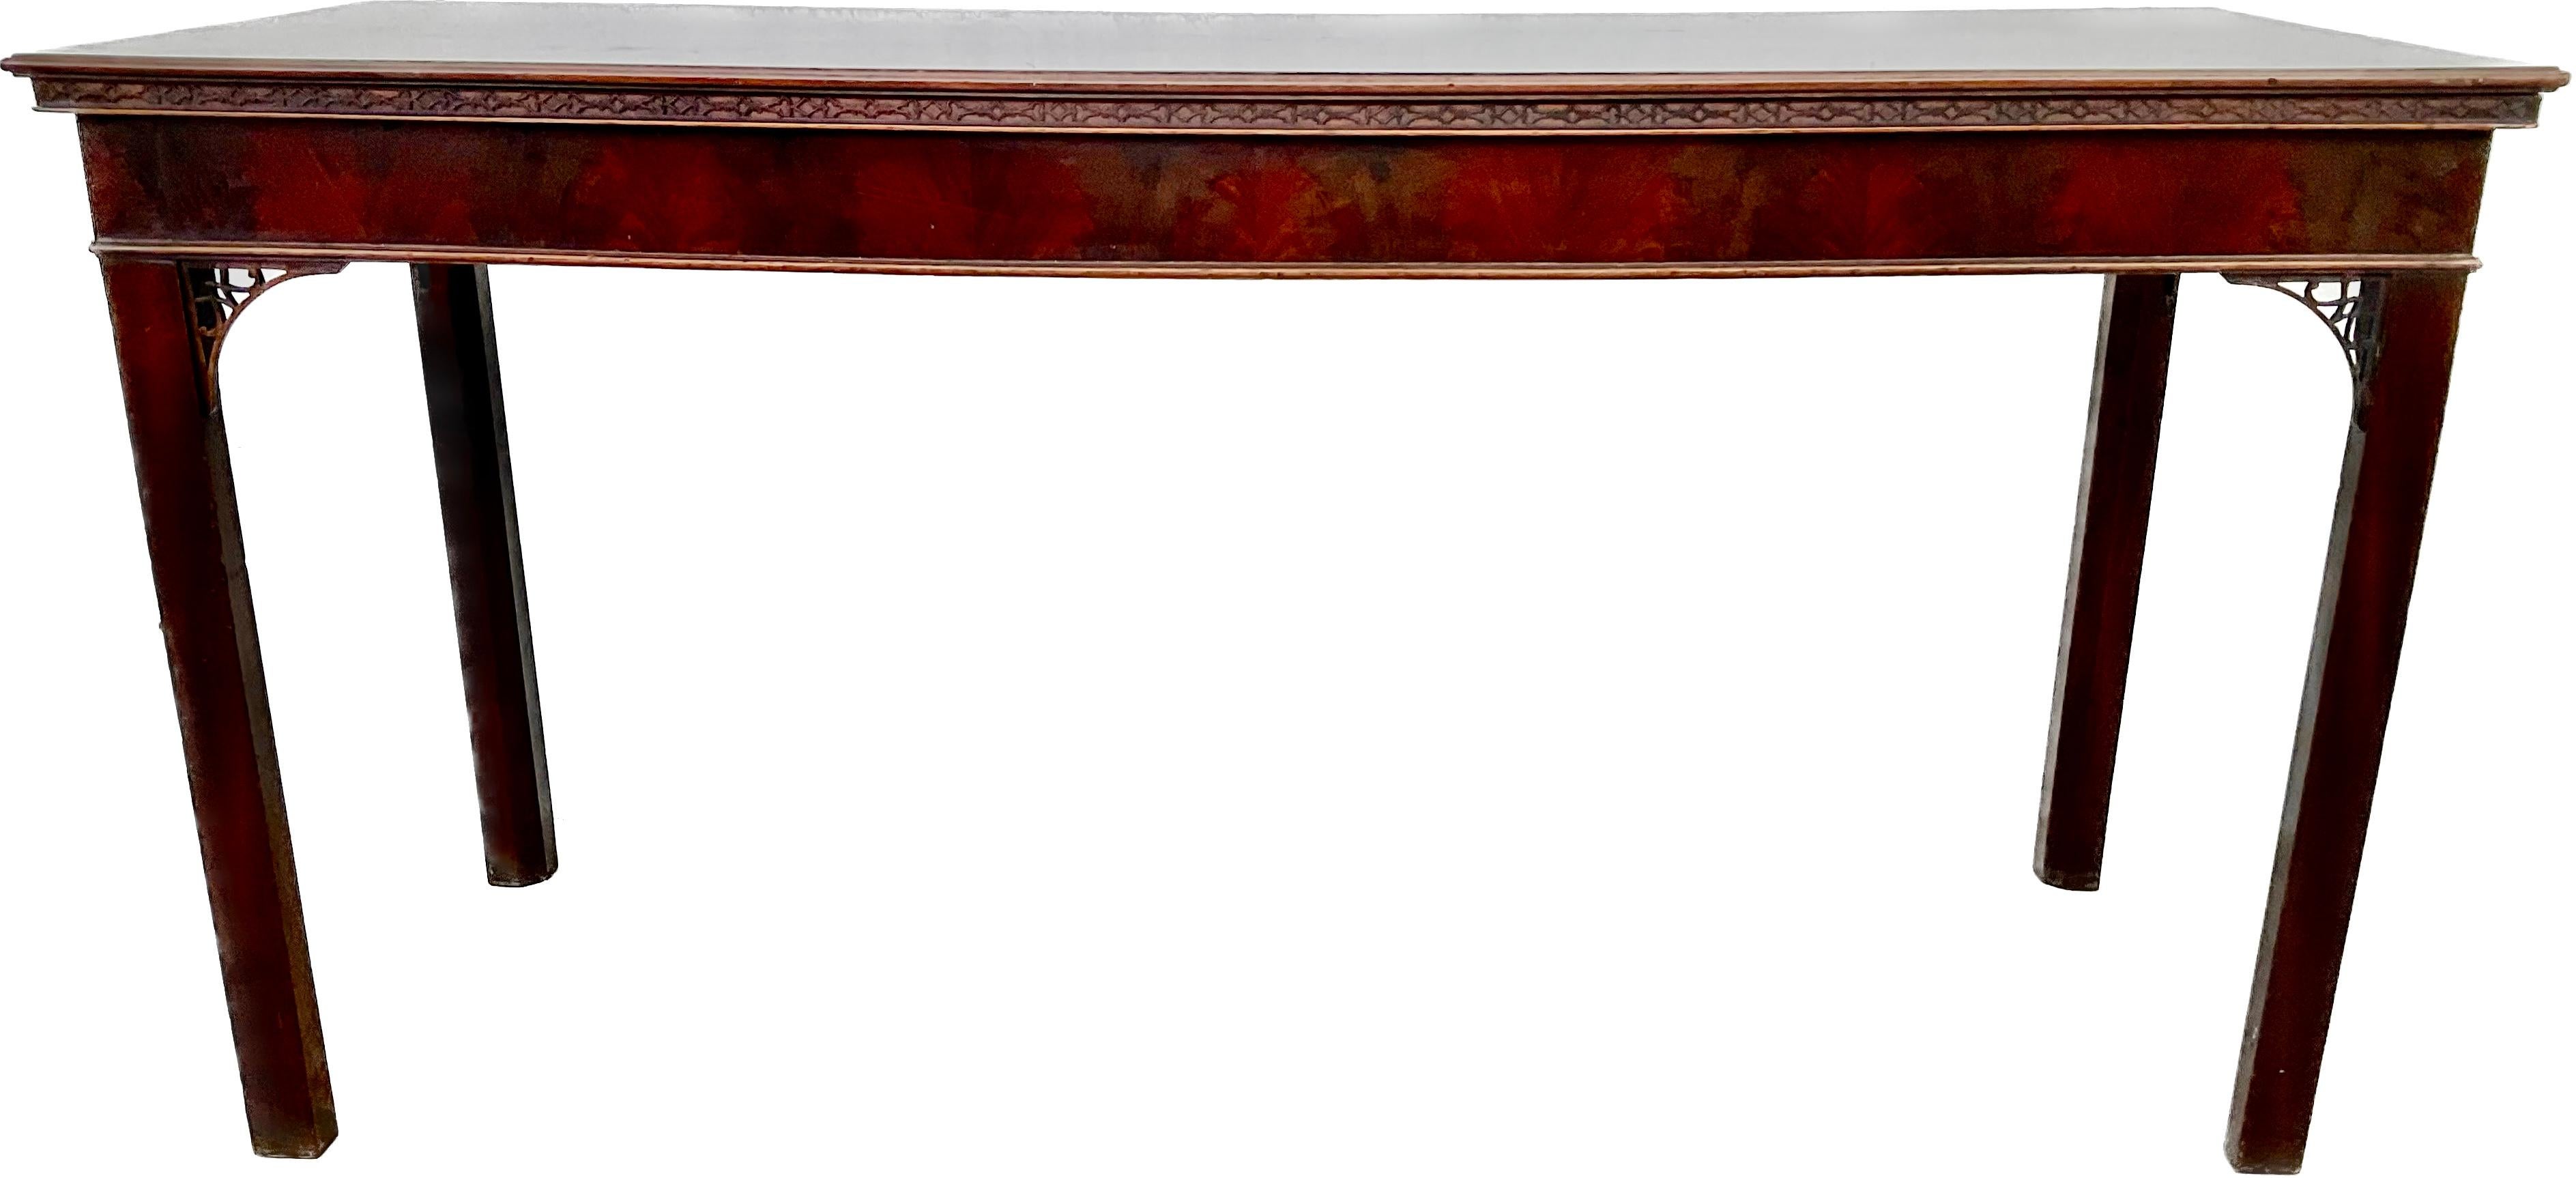 English Chinese Chippendale Mahogany Serving Table For Sale 2